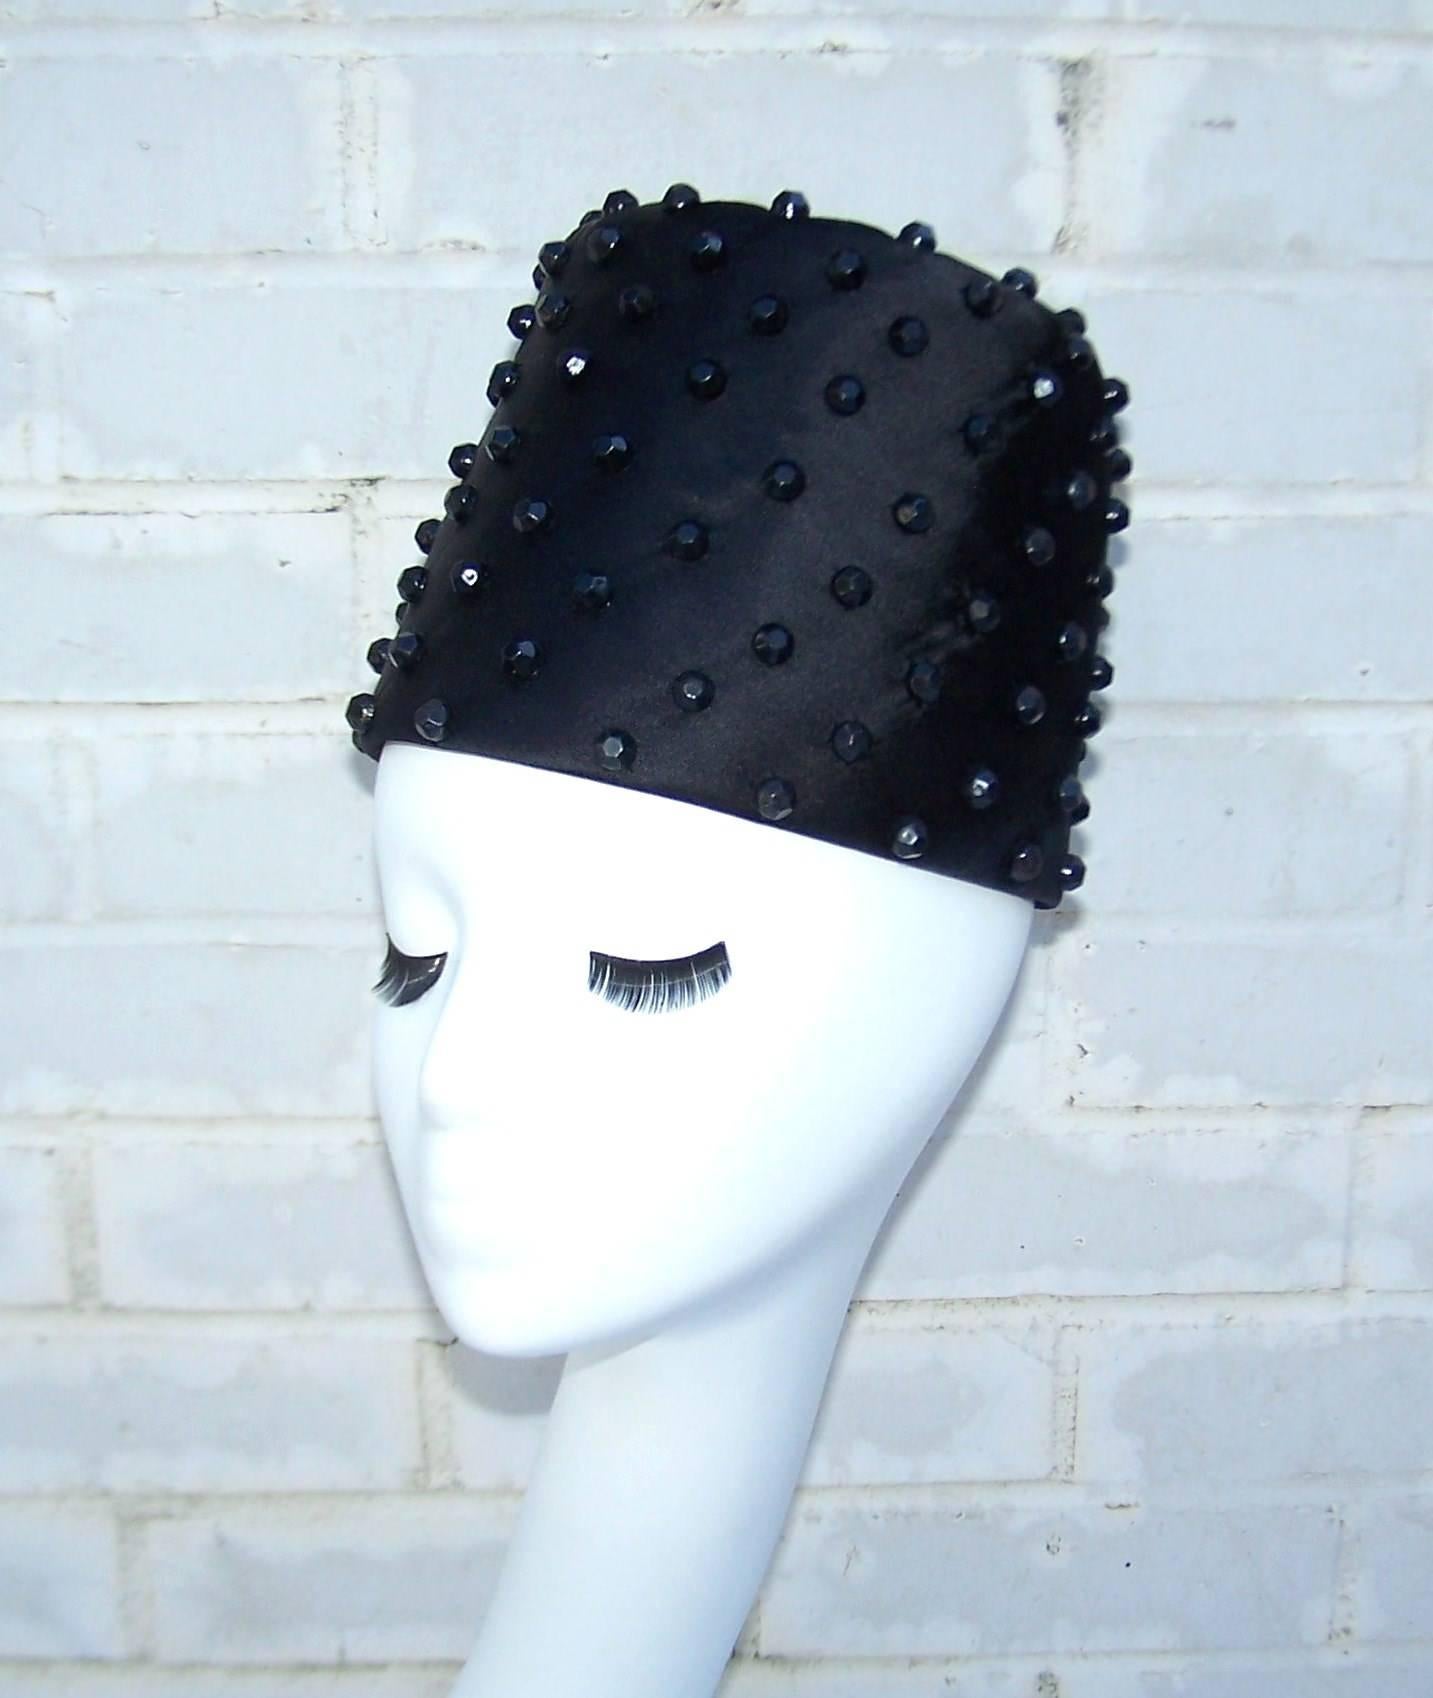 Have an exotic evening in the Casbah in this black satin fez style hat with faceted black beads.  Easy to wear shape that can also be styled cocked to one side for more of a 1940's look.  Pair it with an evening coat or complete the exotic look with